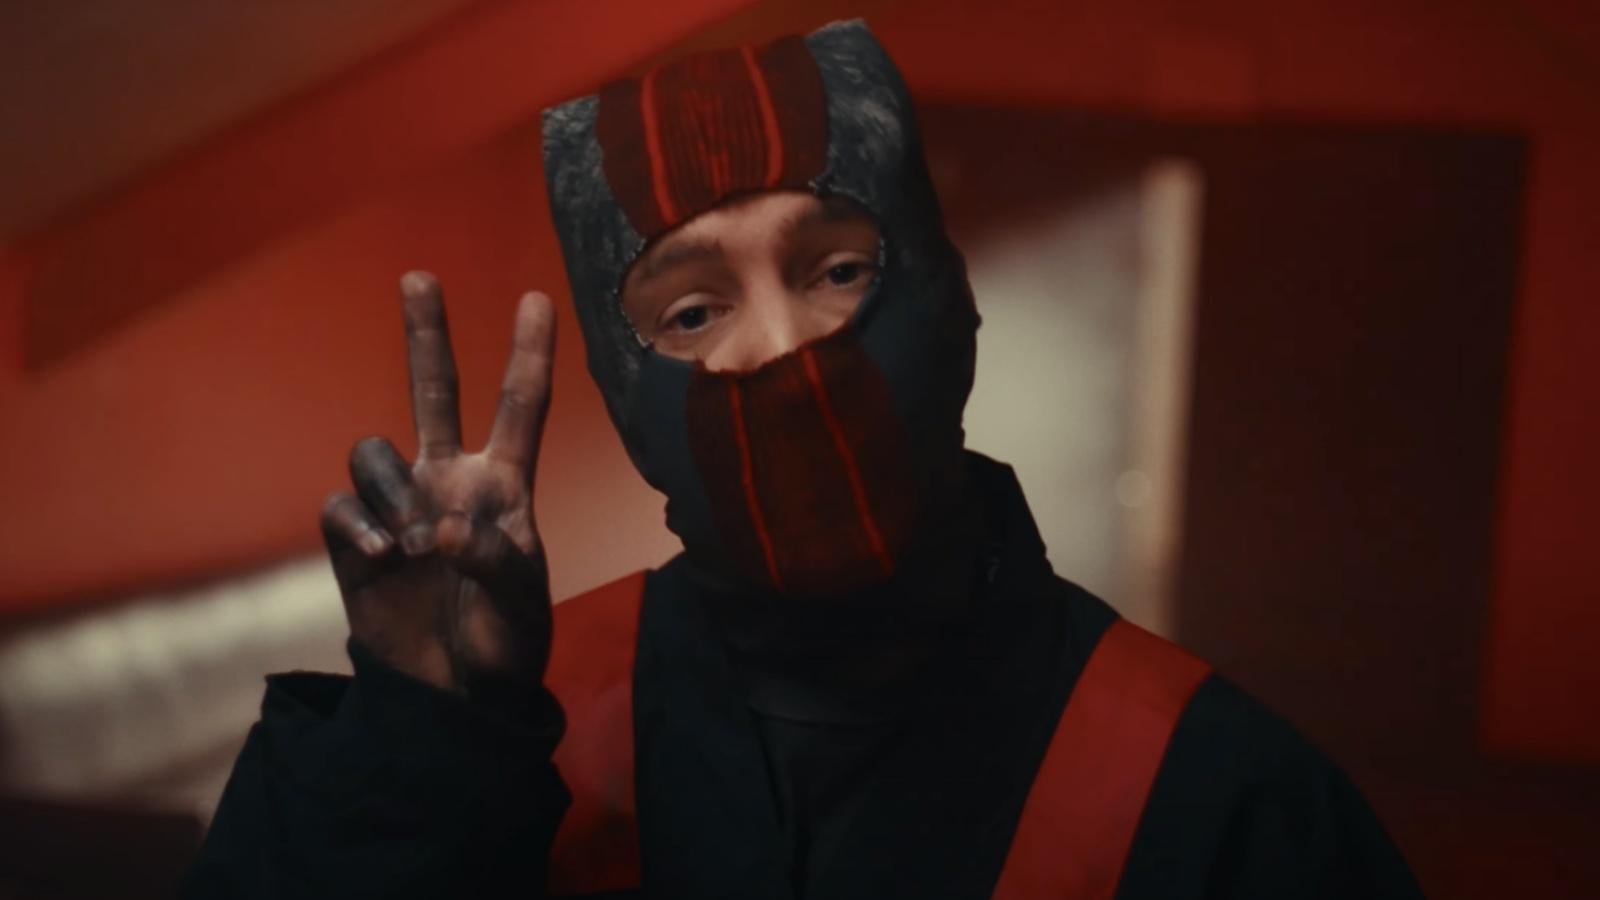 Twenty One Pilots hold up a peace sign in 'Overcompensate' video